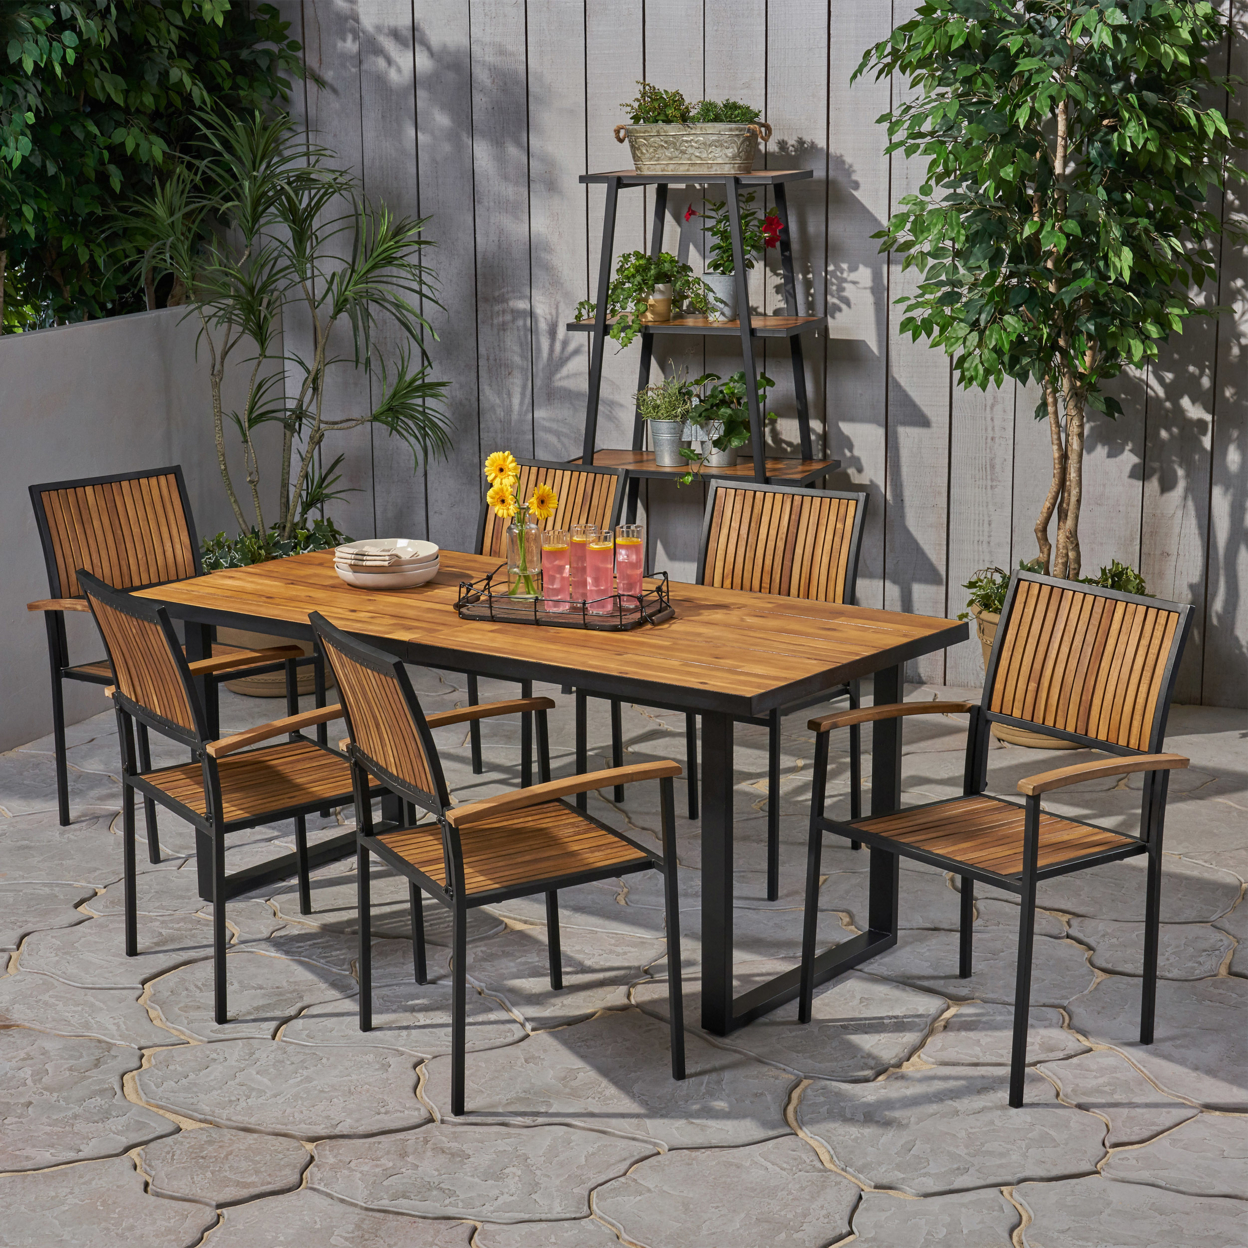 Aurora Outdoor 6 Seater Acacia Wood Dining Set With An Iron Frame